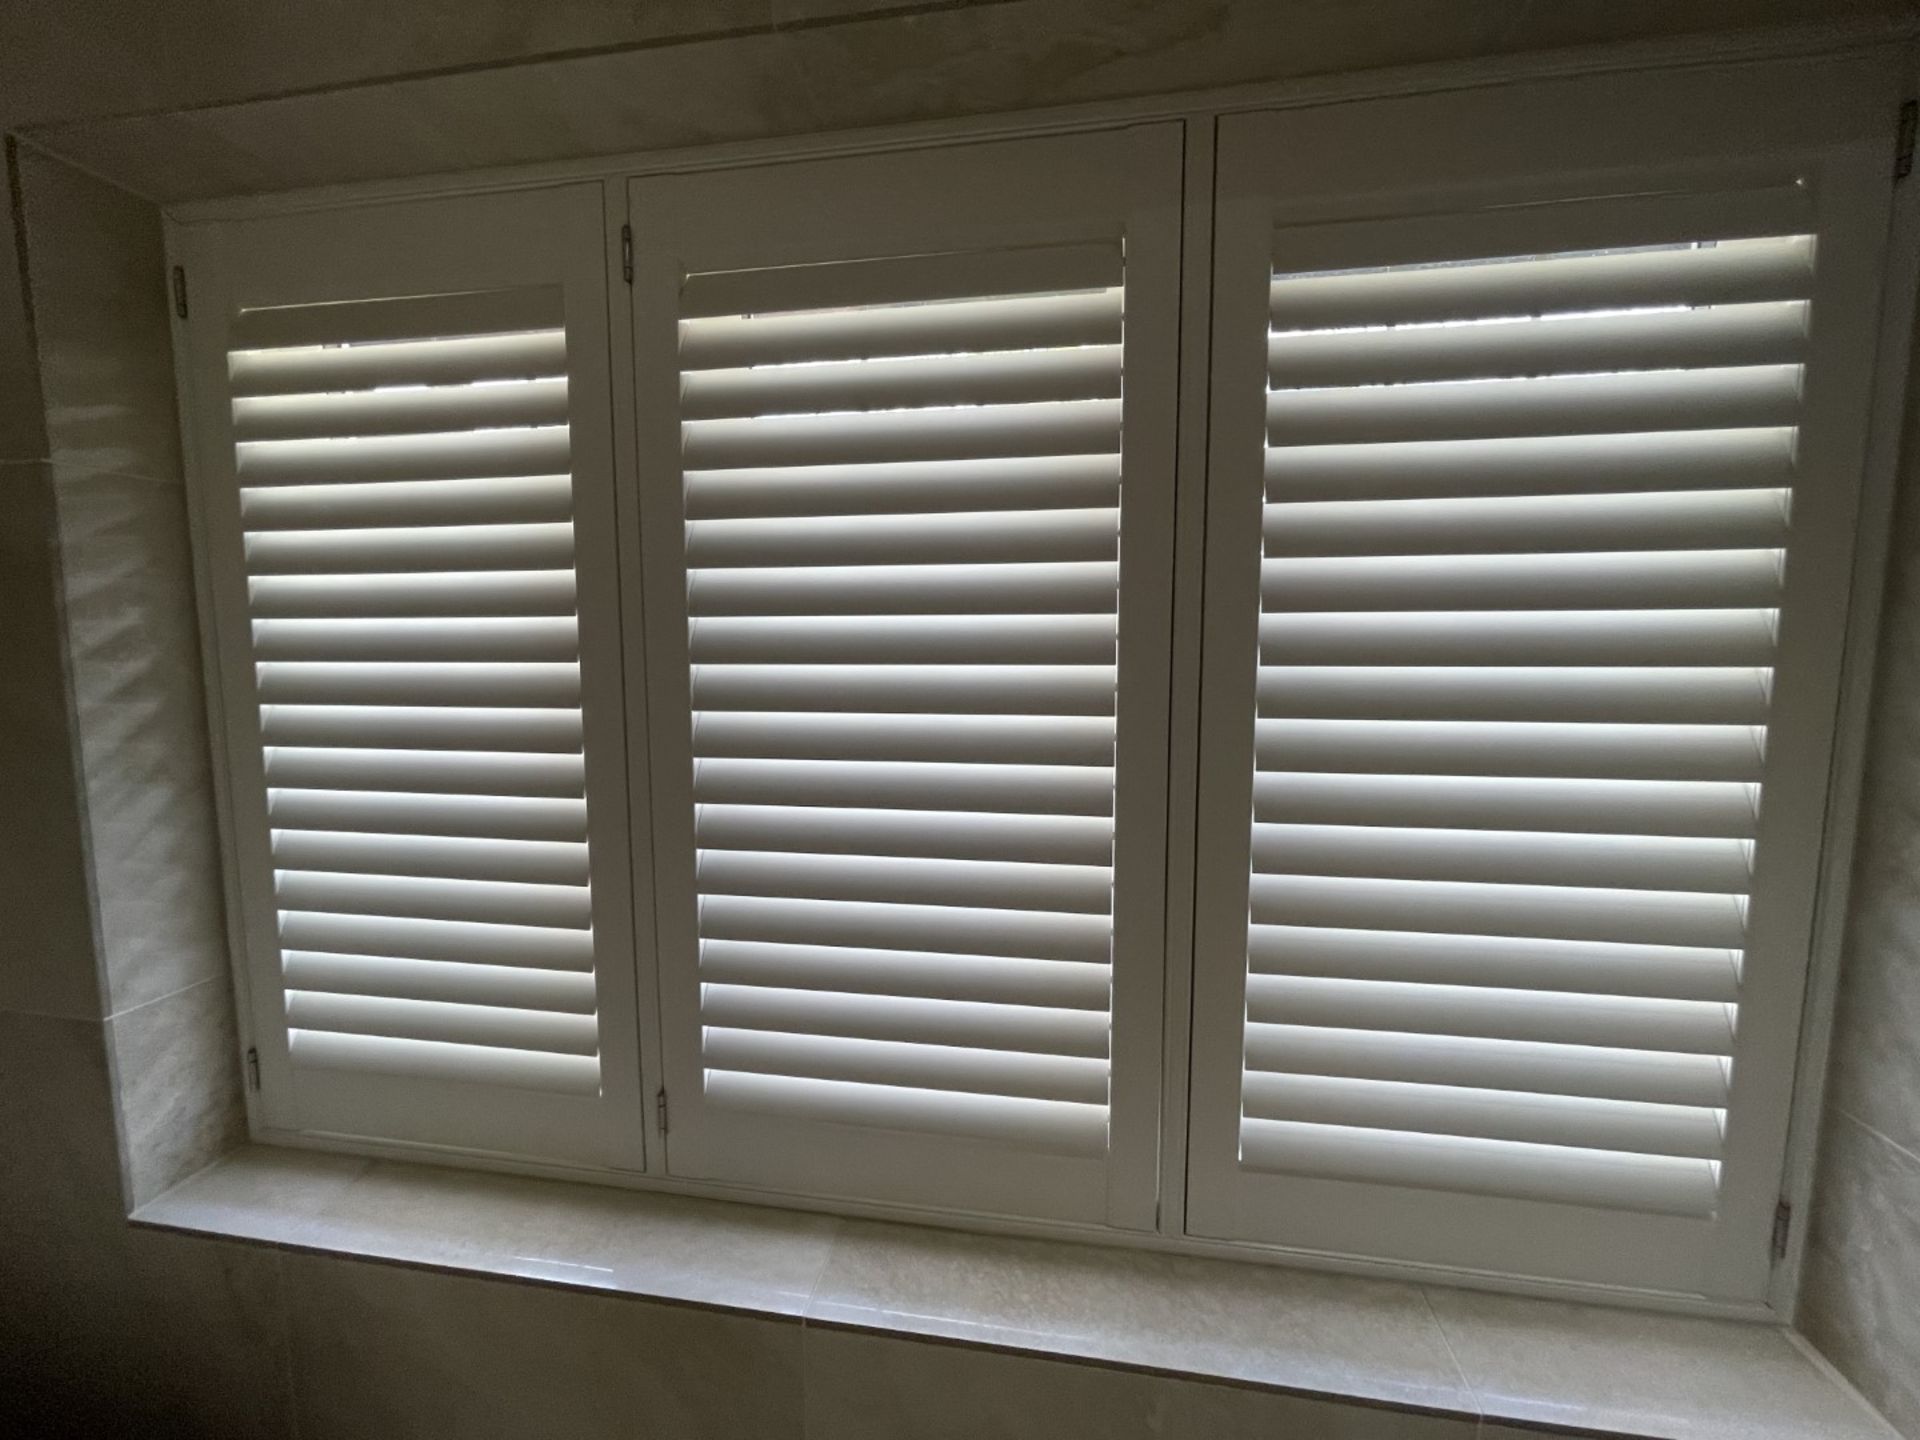 1 x Hardwood Timber Double Glazed Leaded 3-Pane Window Frame fitted with Shutter Blinds - Image 12 of 15